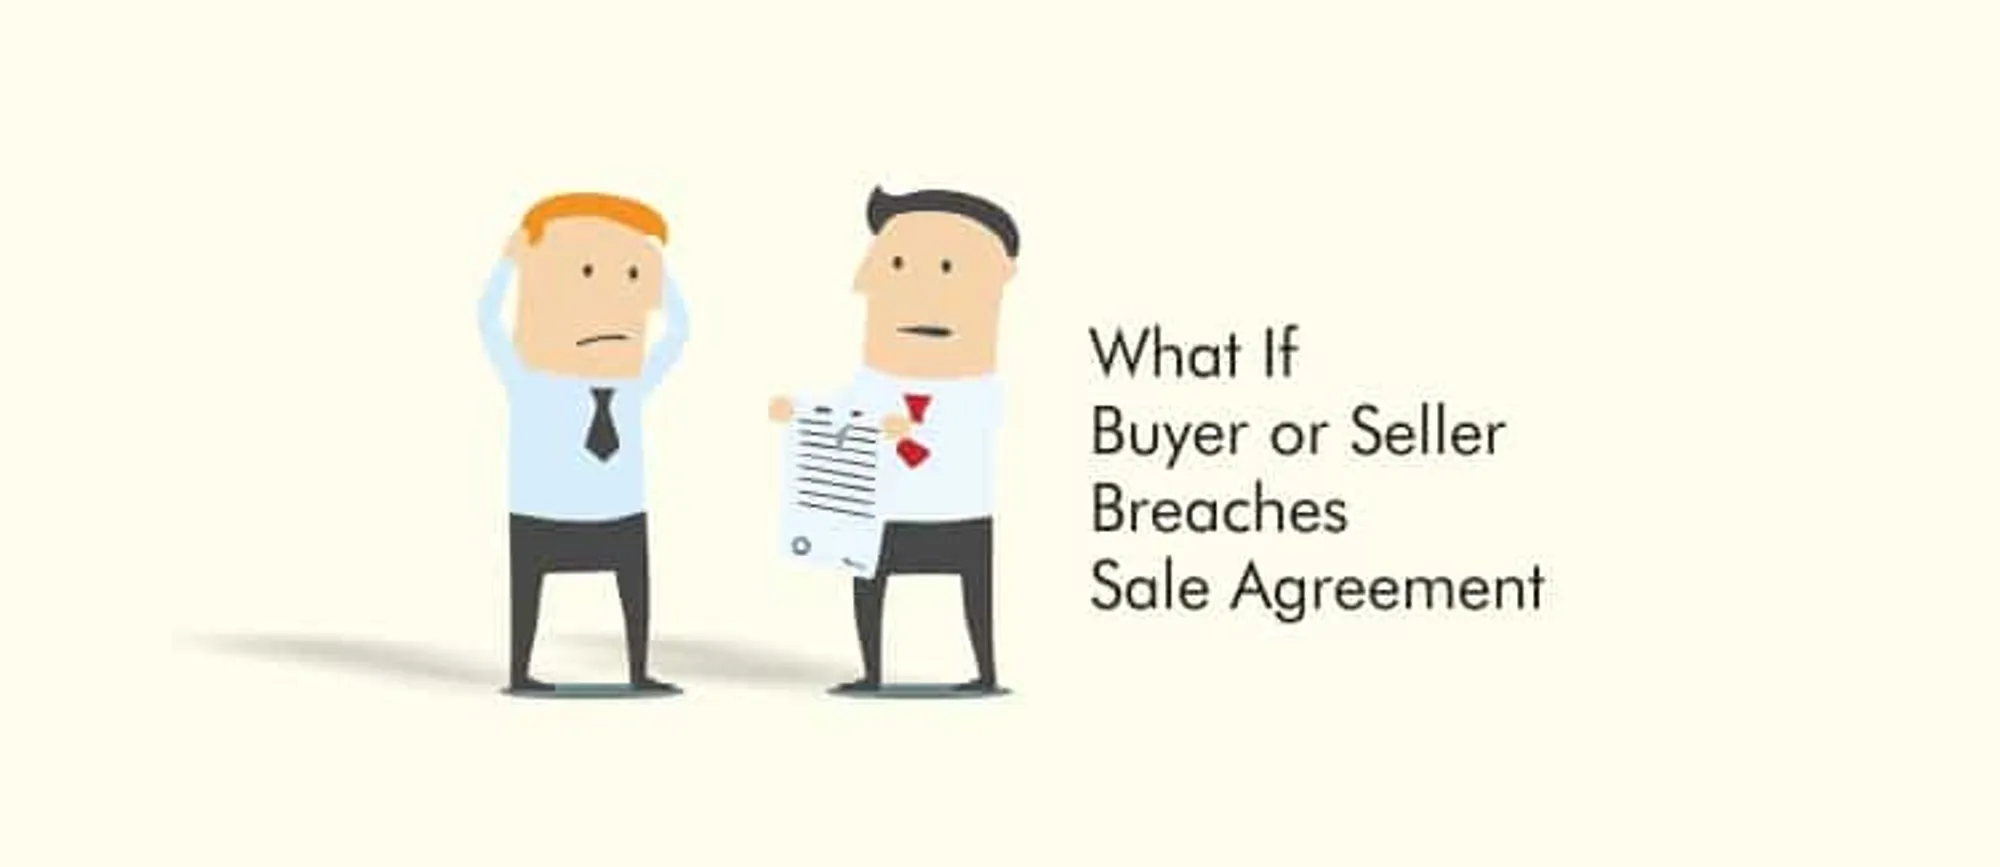 What If Buyer or Seller Breaches Sale Agreement